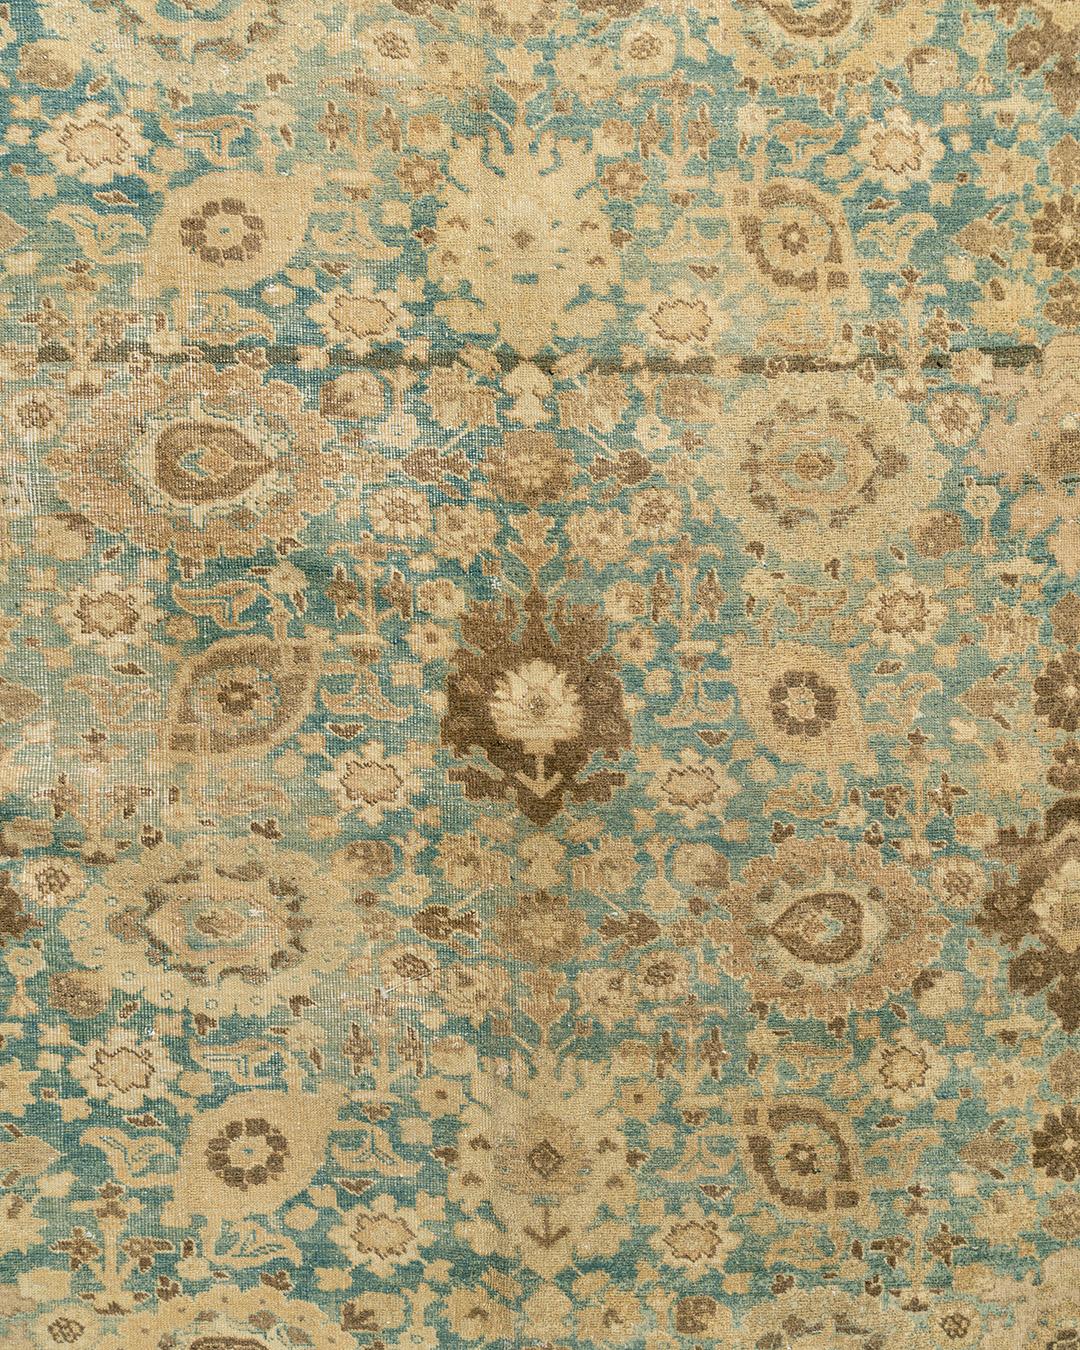 Antique Persian Tabriz rug, circa 1900 10'9 x 15'6'. A small pattern version of the ever-popular harshang (crab) design of various styles of palmettes, rosettes and leaves closely covers the light blue ground of this finely woven urban Tabriz carpet